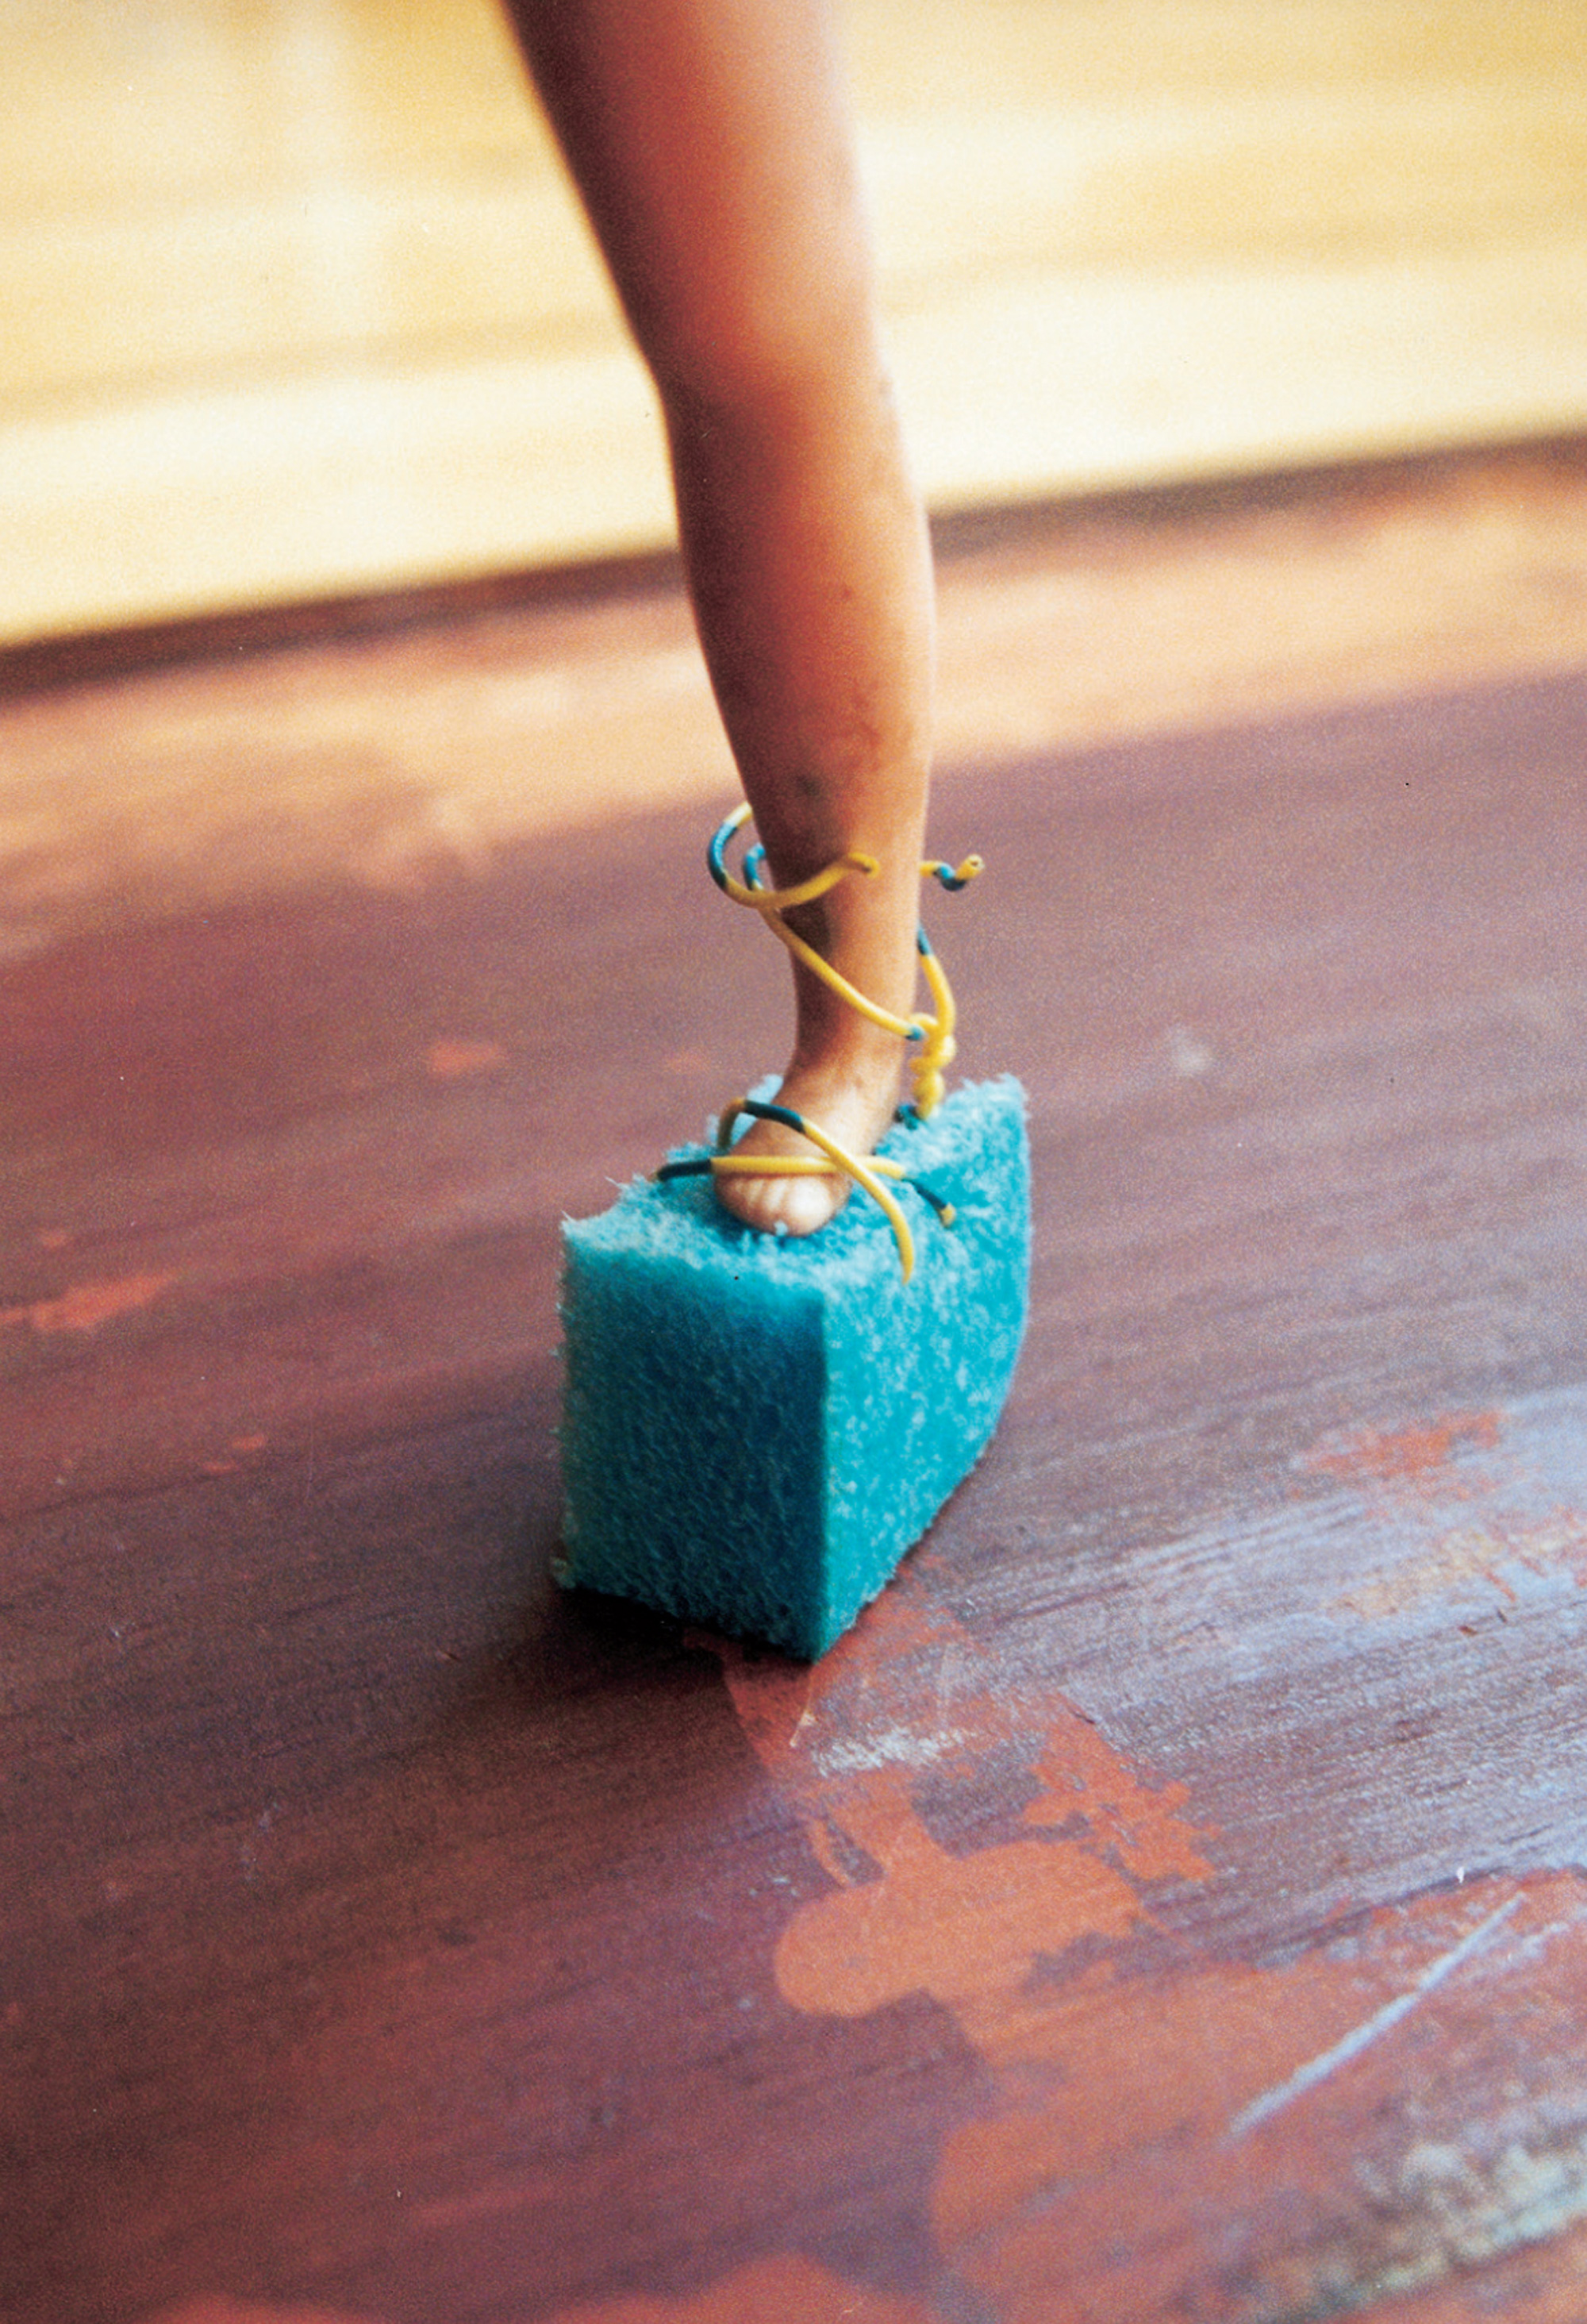 Single platform sandal of blue styrofoam with straps of yellow and blue telephone wire securing the toe with an X but loose at the ankle, up which they are possibly intended to be crisscrossed, Roman style. This artifact exemplifies the Doll Games’ strategic appropriation and ironic framing of elements of the dominant culture (in this case, popular styles of the disco era). The care put into crafting an article that would have been spurned by the Doll Games’ androgynous heroines shows the complex interplay of desire and scorn in the Doll Games’ ongoing interrogation of femininity. Just whose foot did the cobbler have in mind? Like the bewildered prince in the fairy tale, we are left with a shoe and a question.